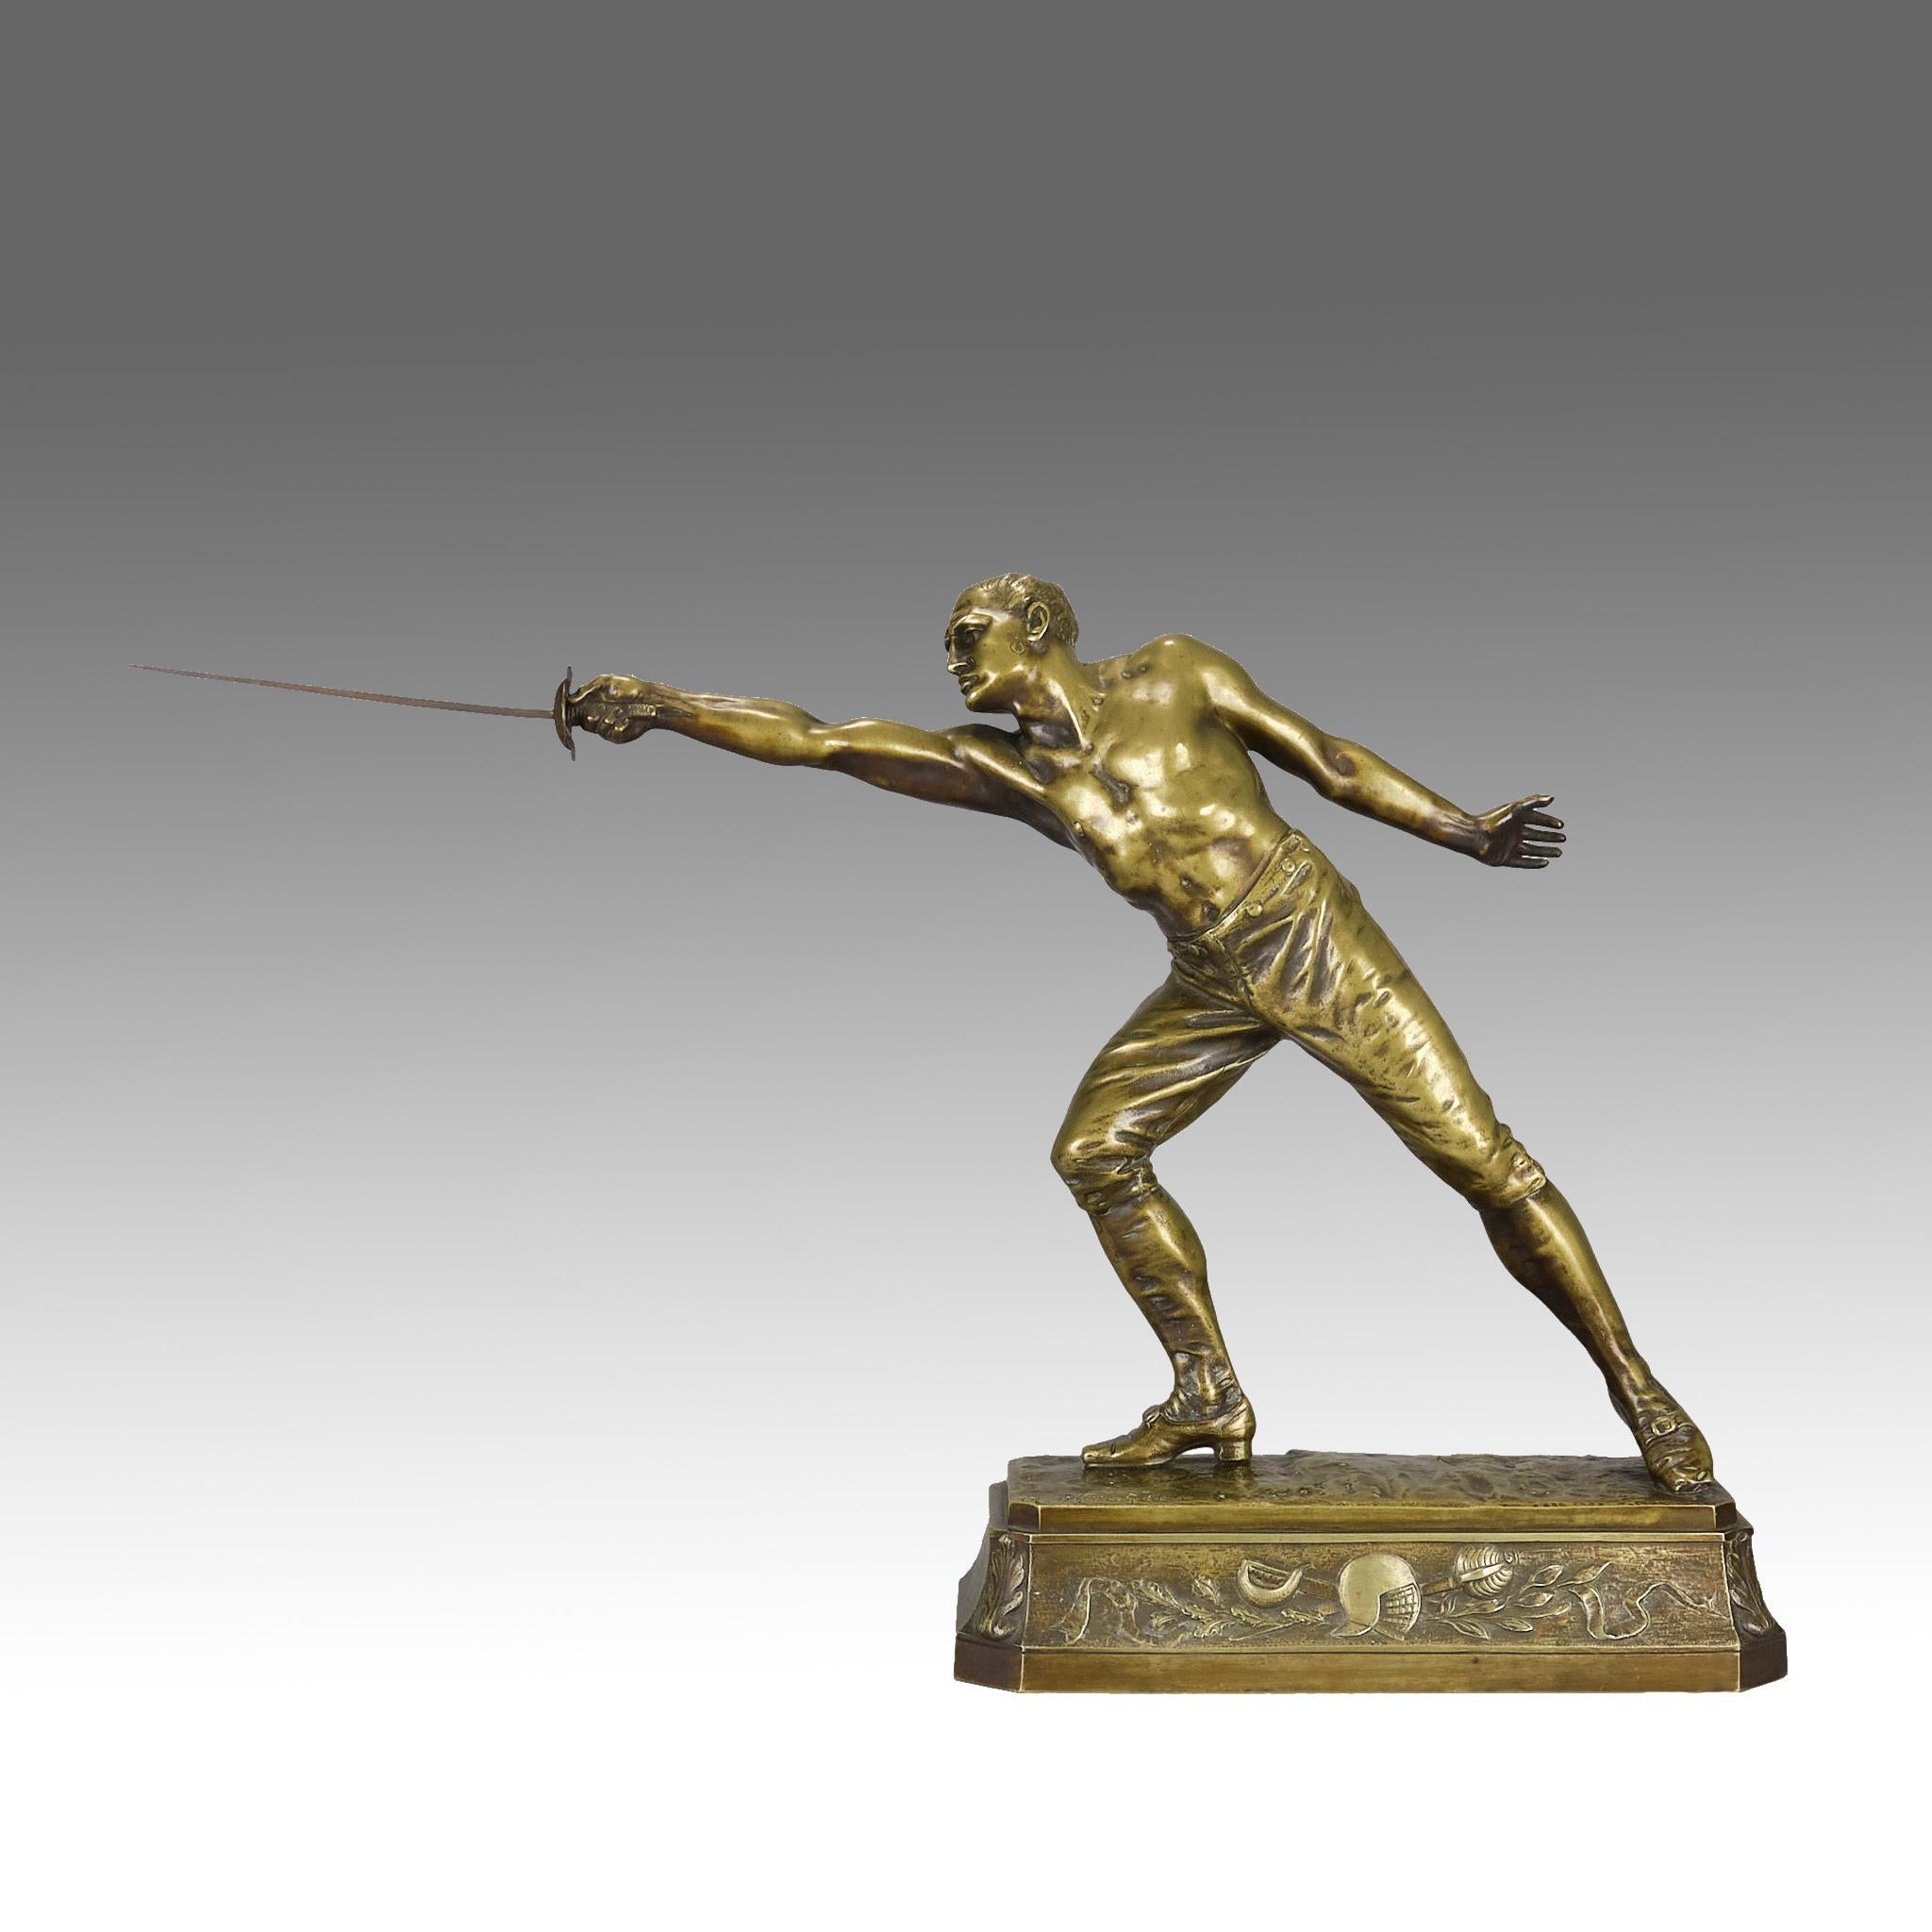 An impressive Austrian bronze study of a muscular fencer in mid lung with excellent golden patina and very fine hand finished surface detail, raised on a decorative integral base, signed R. Kuchler & stamped 'Vrai Bronze Depose K'

ADDITIONAL